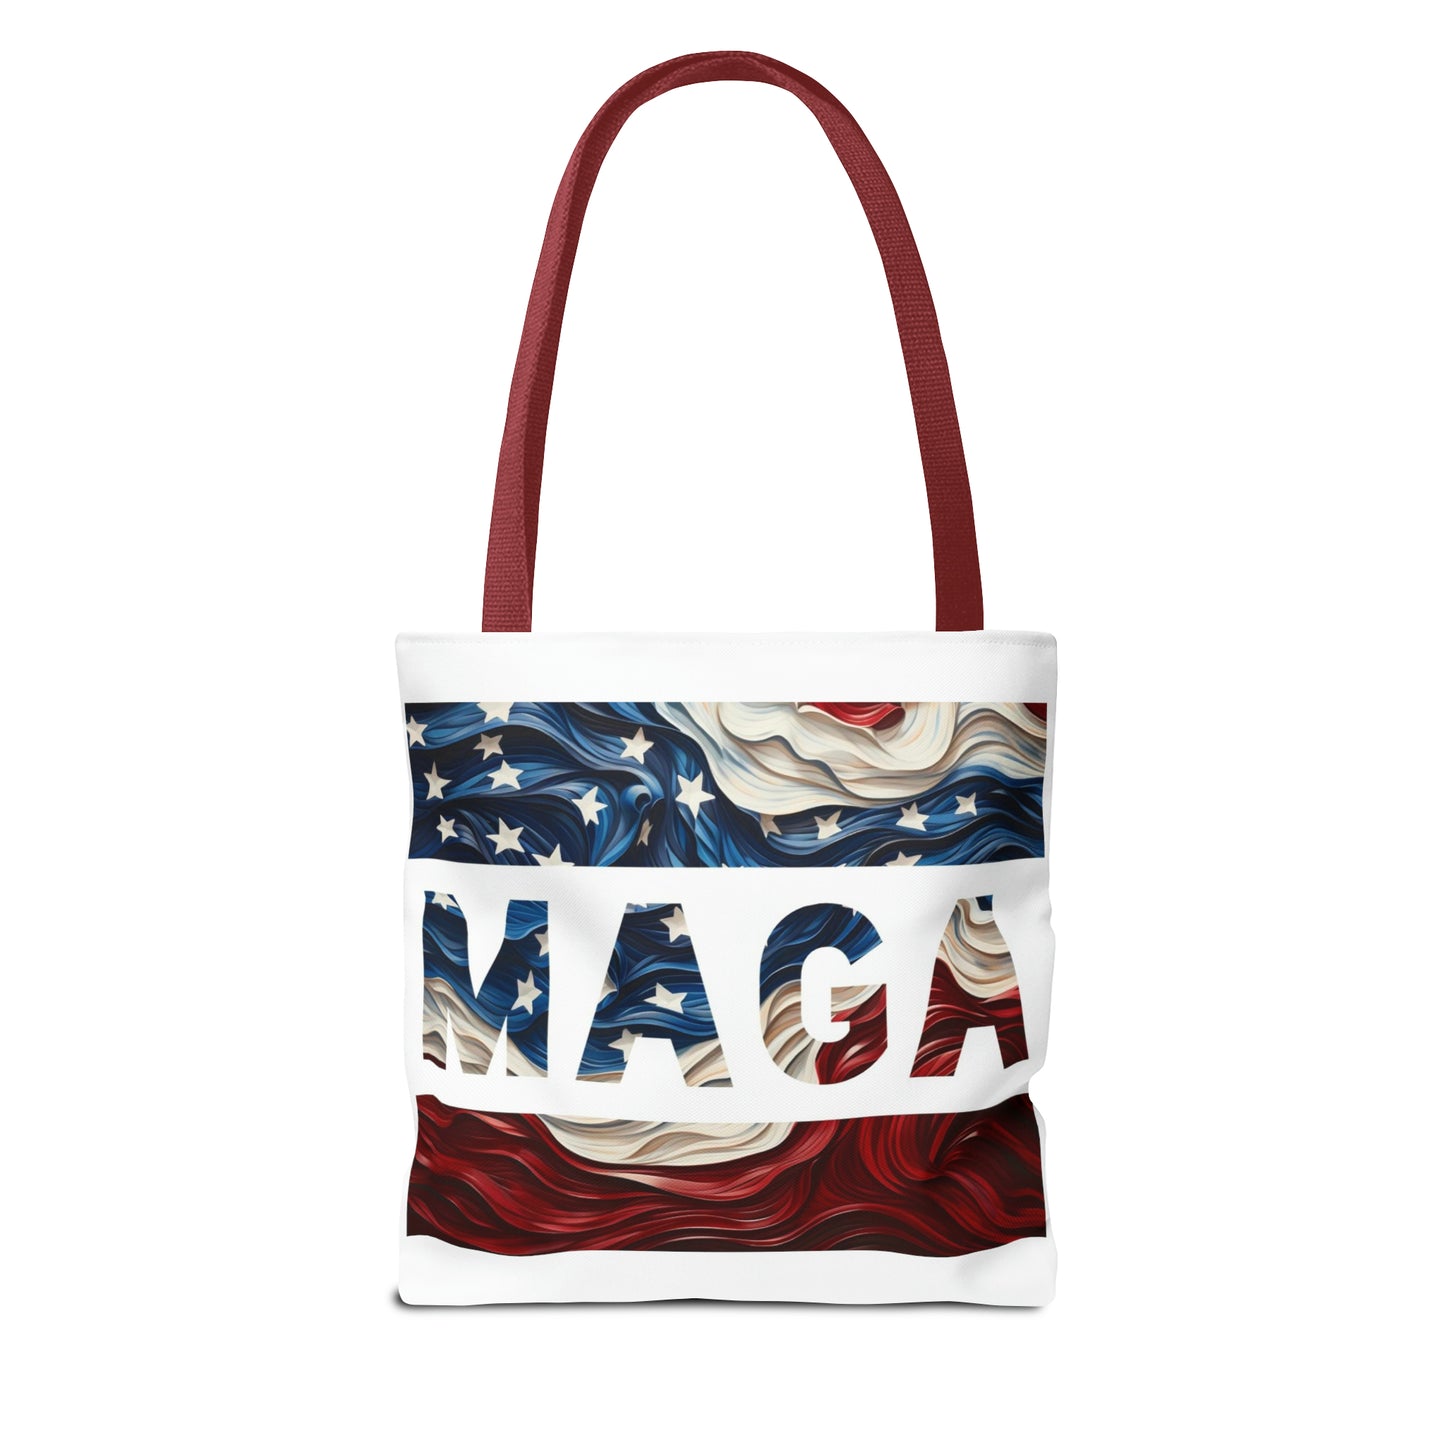 MAGA Red White and Blue Trump Rally Heavy Duty Tote Bag